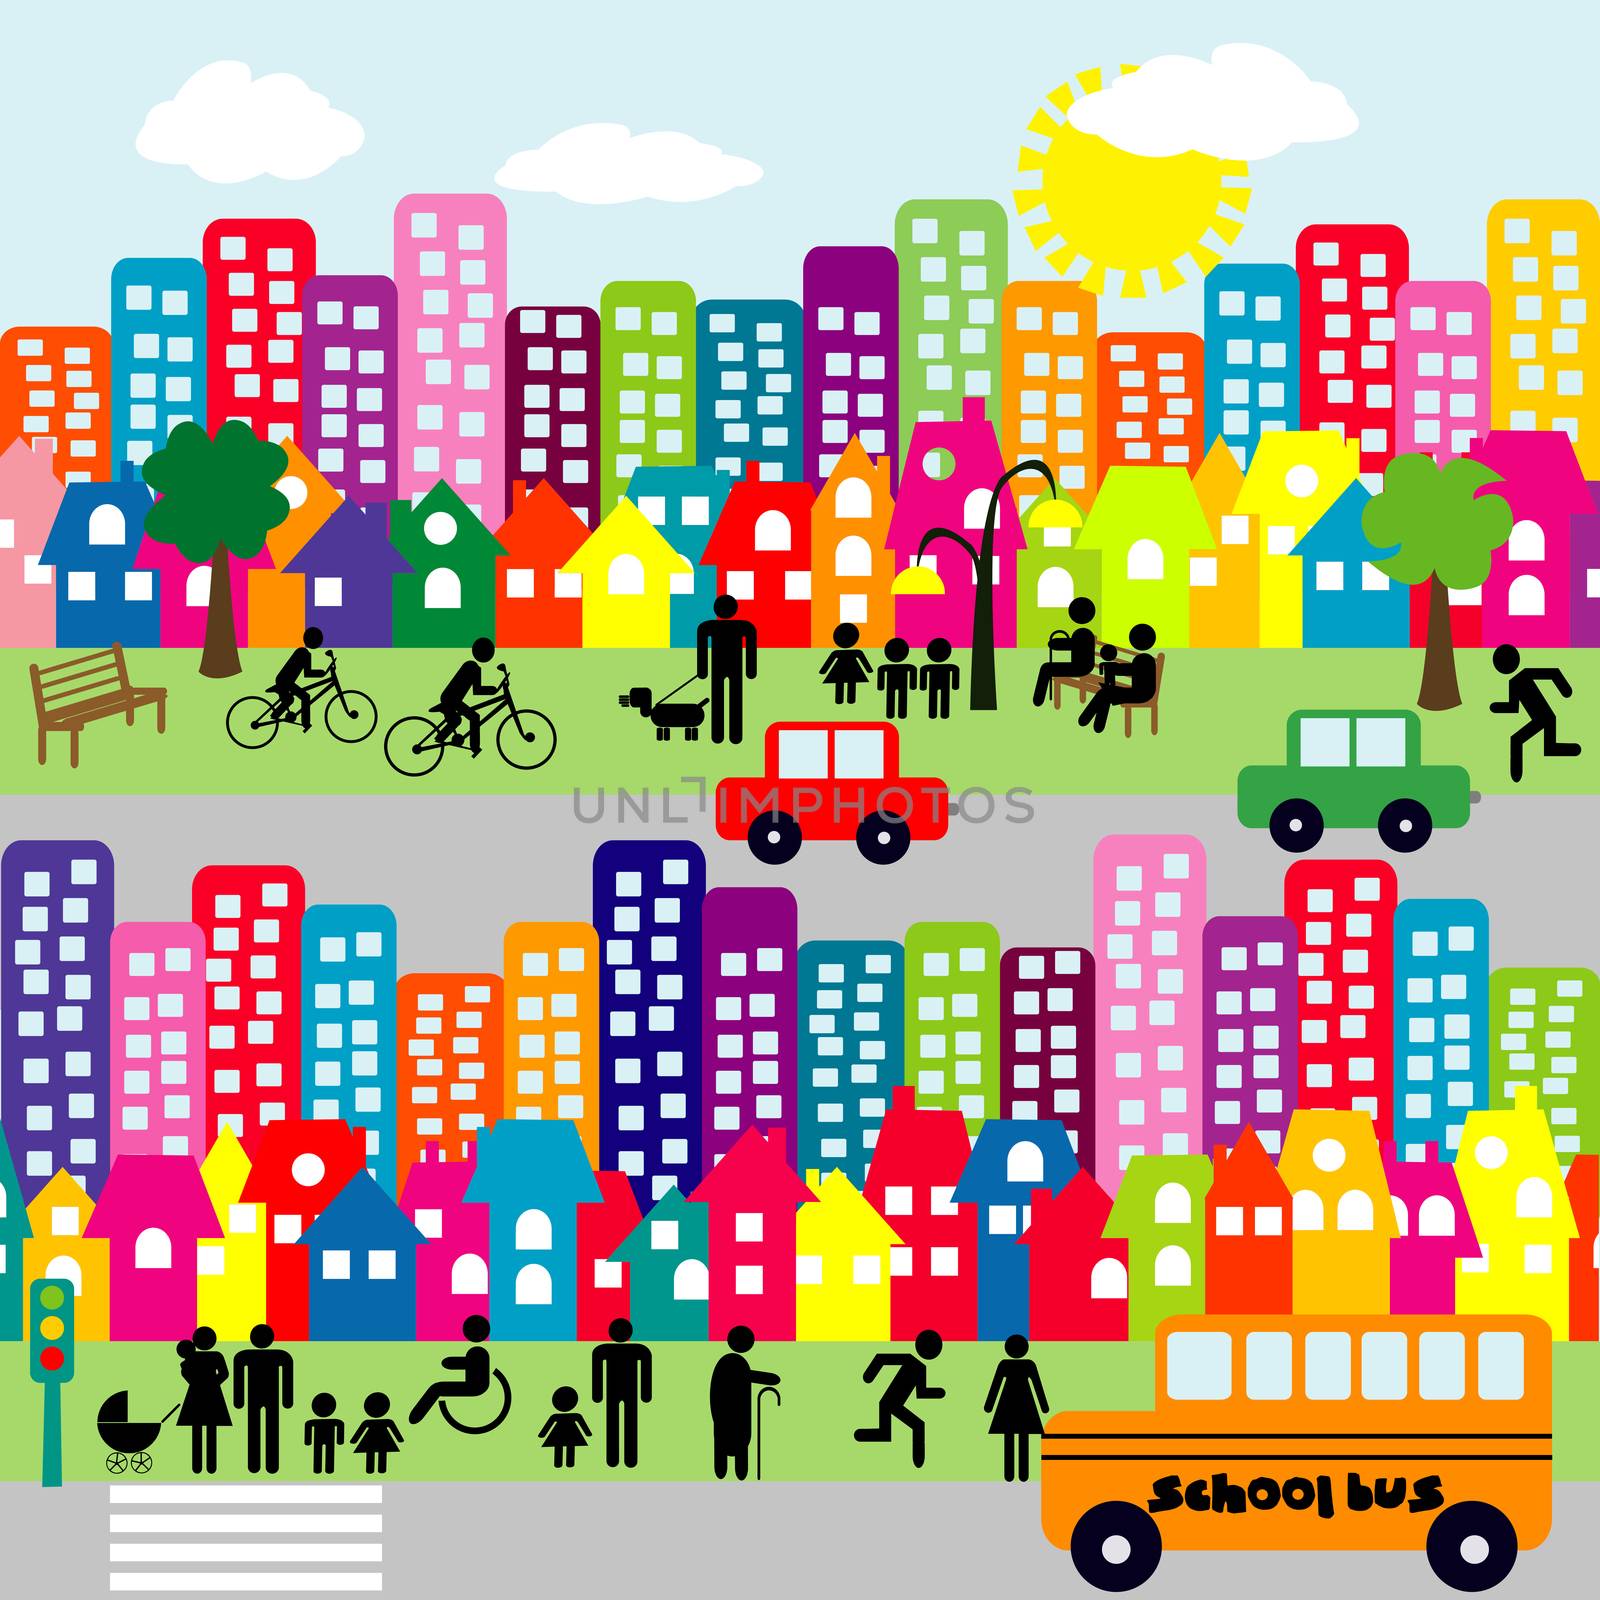 Cartoon city with people pictograms by hibrida13